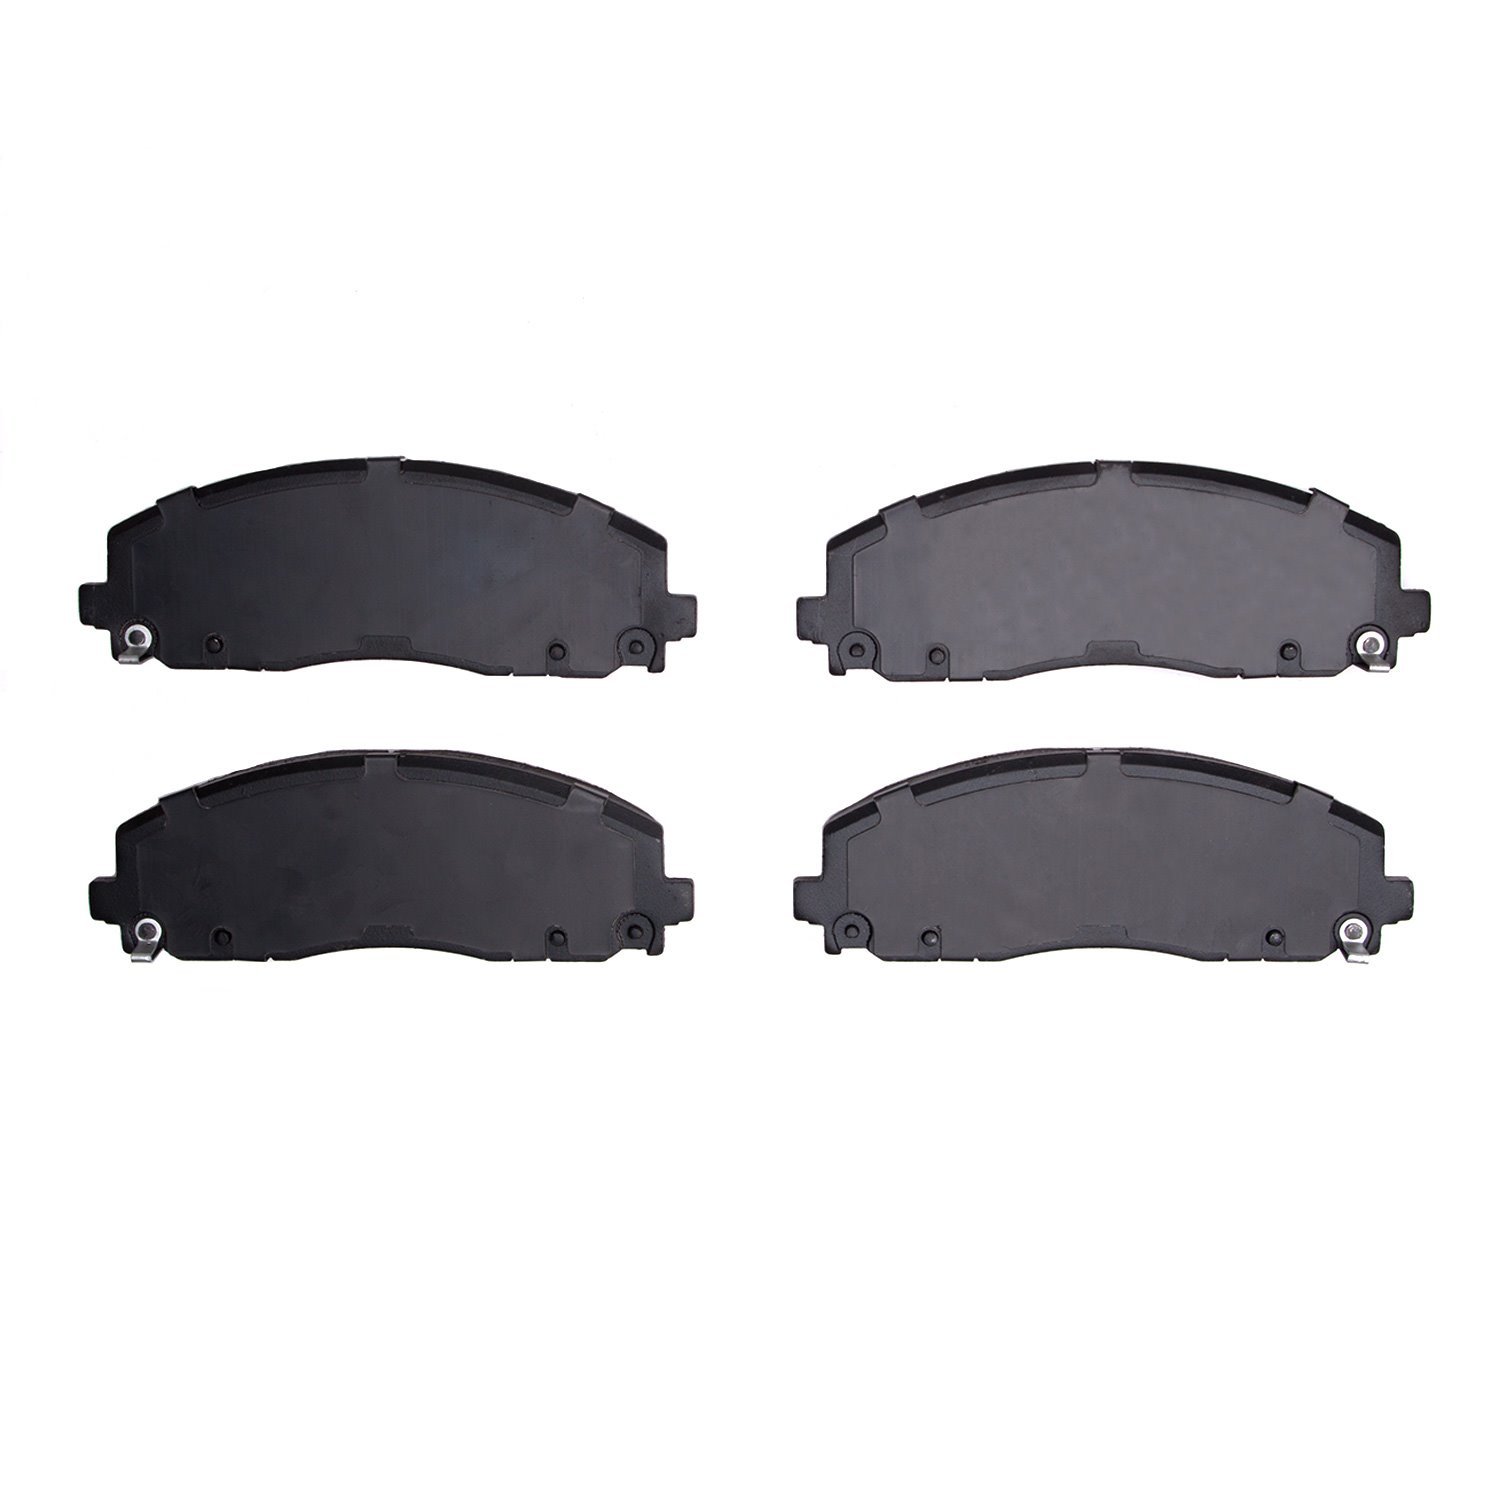 1310-1589-00 3000-Series Ceramic Brake Pads, Fits Select Multiple Makes/Models, Position: Front